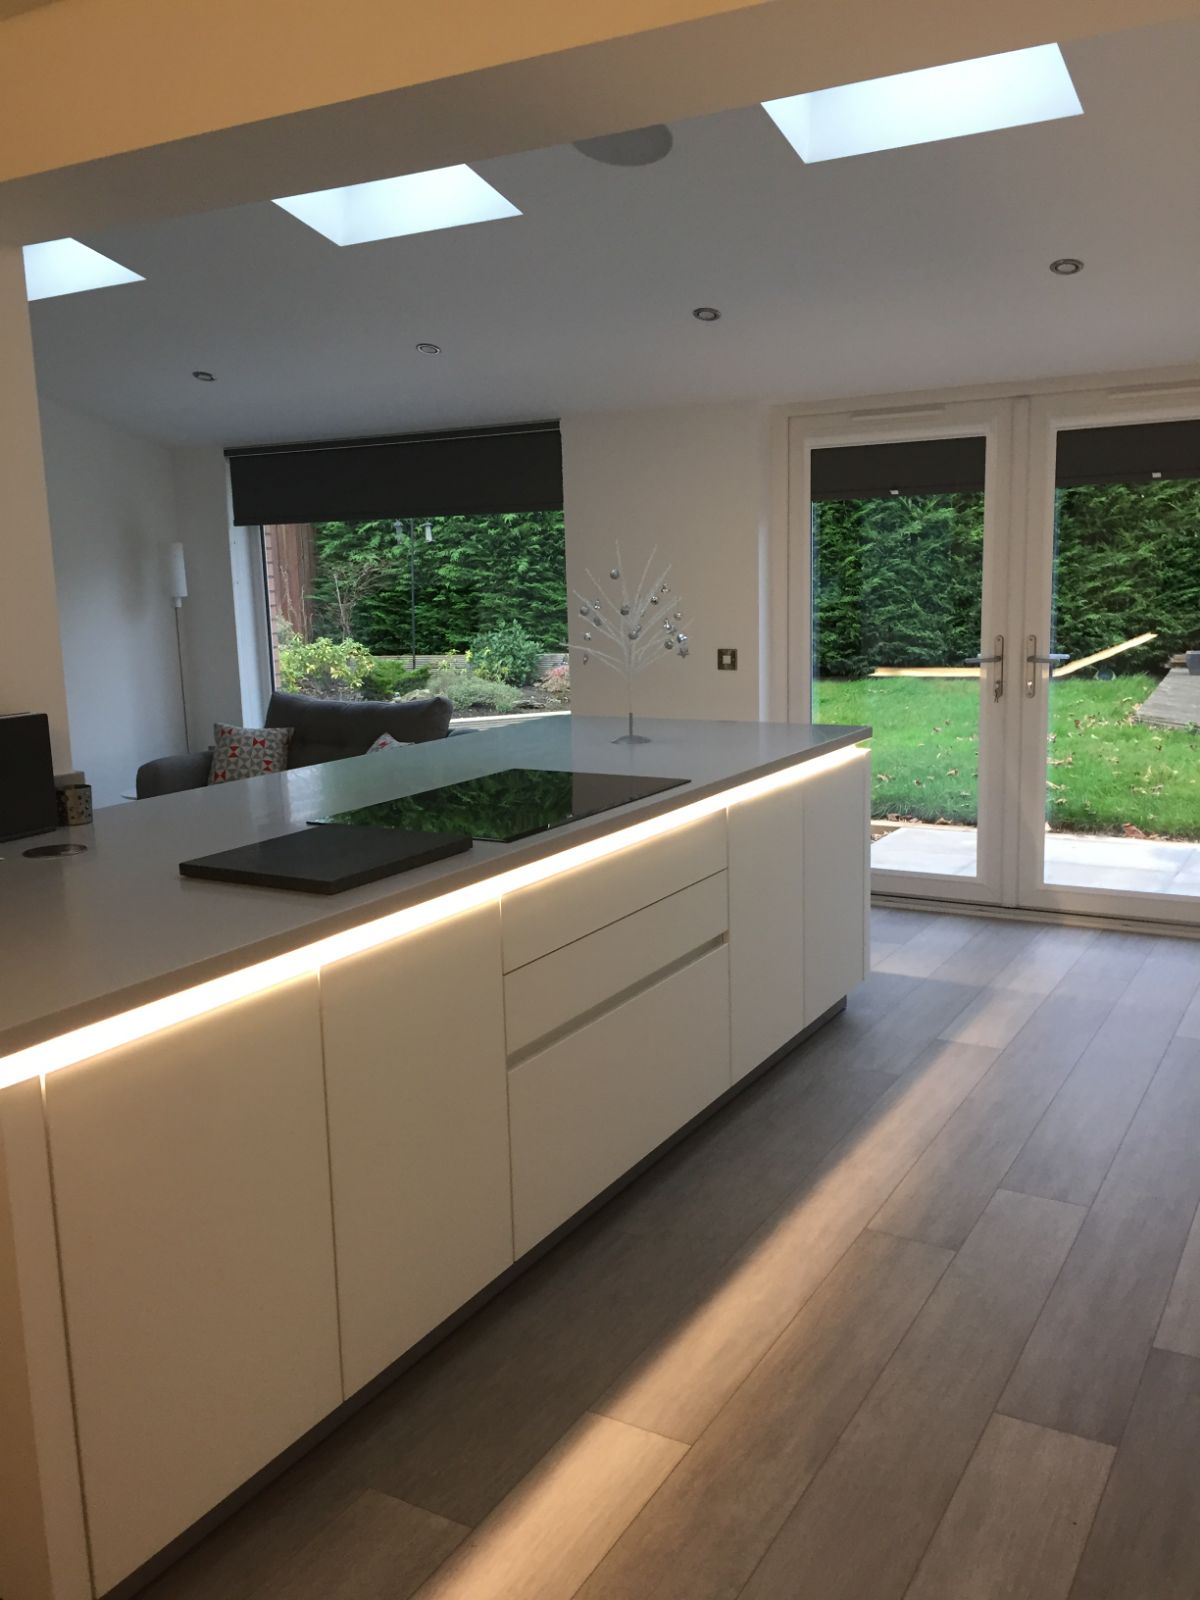 Large extension, Utility, kitchen/dining area complete with large feature picture window/upvc french doors/velux roof windows